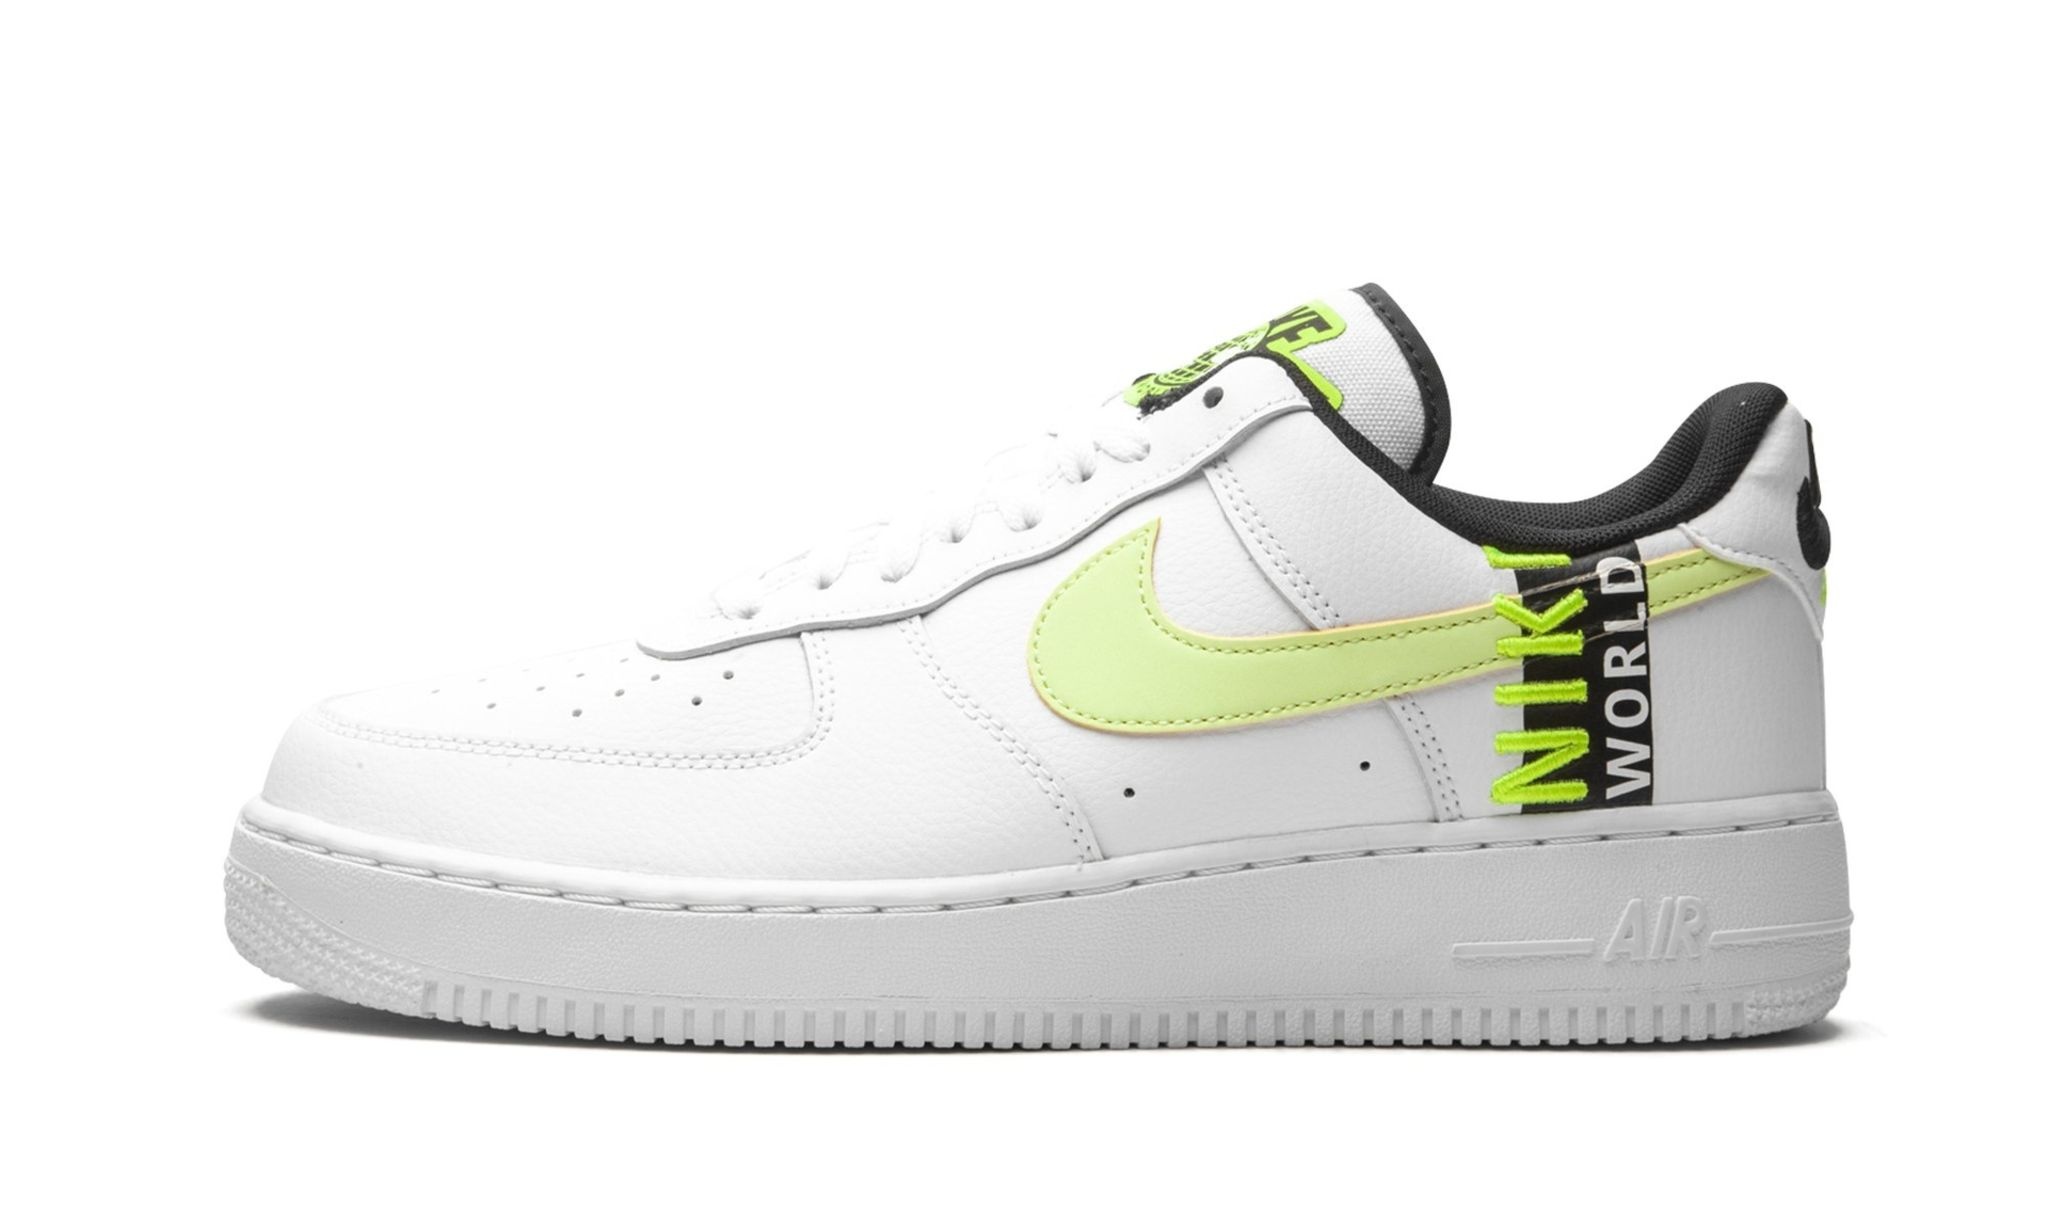 Air Force 1 Low "Worldwide White Volt" - 1